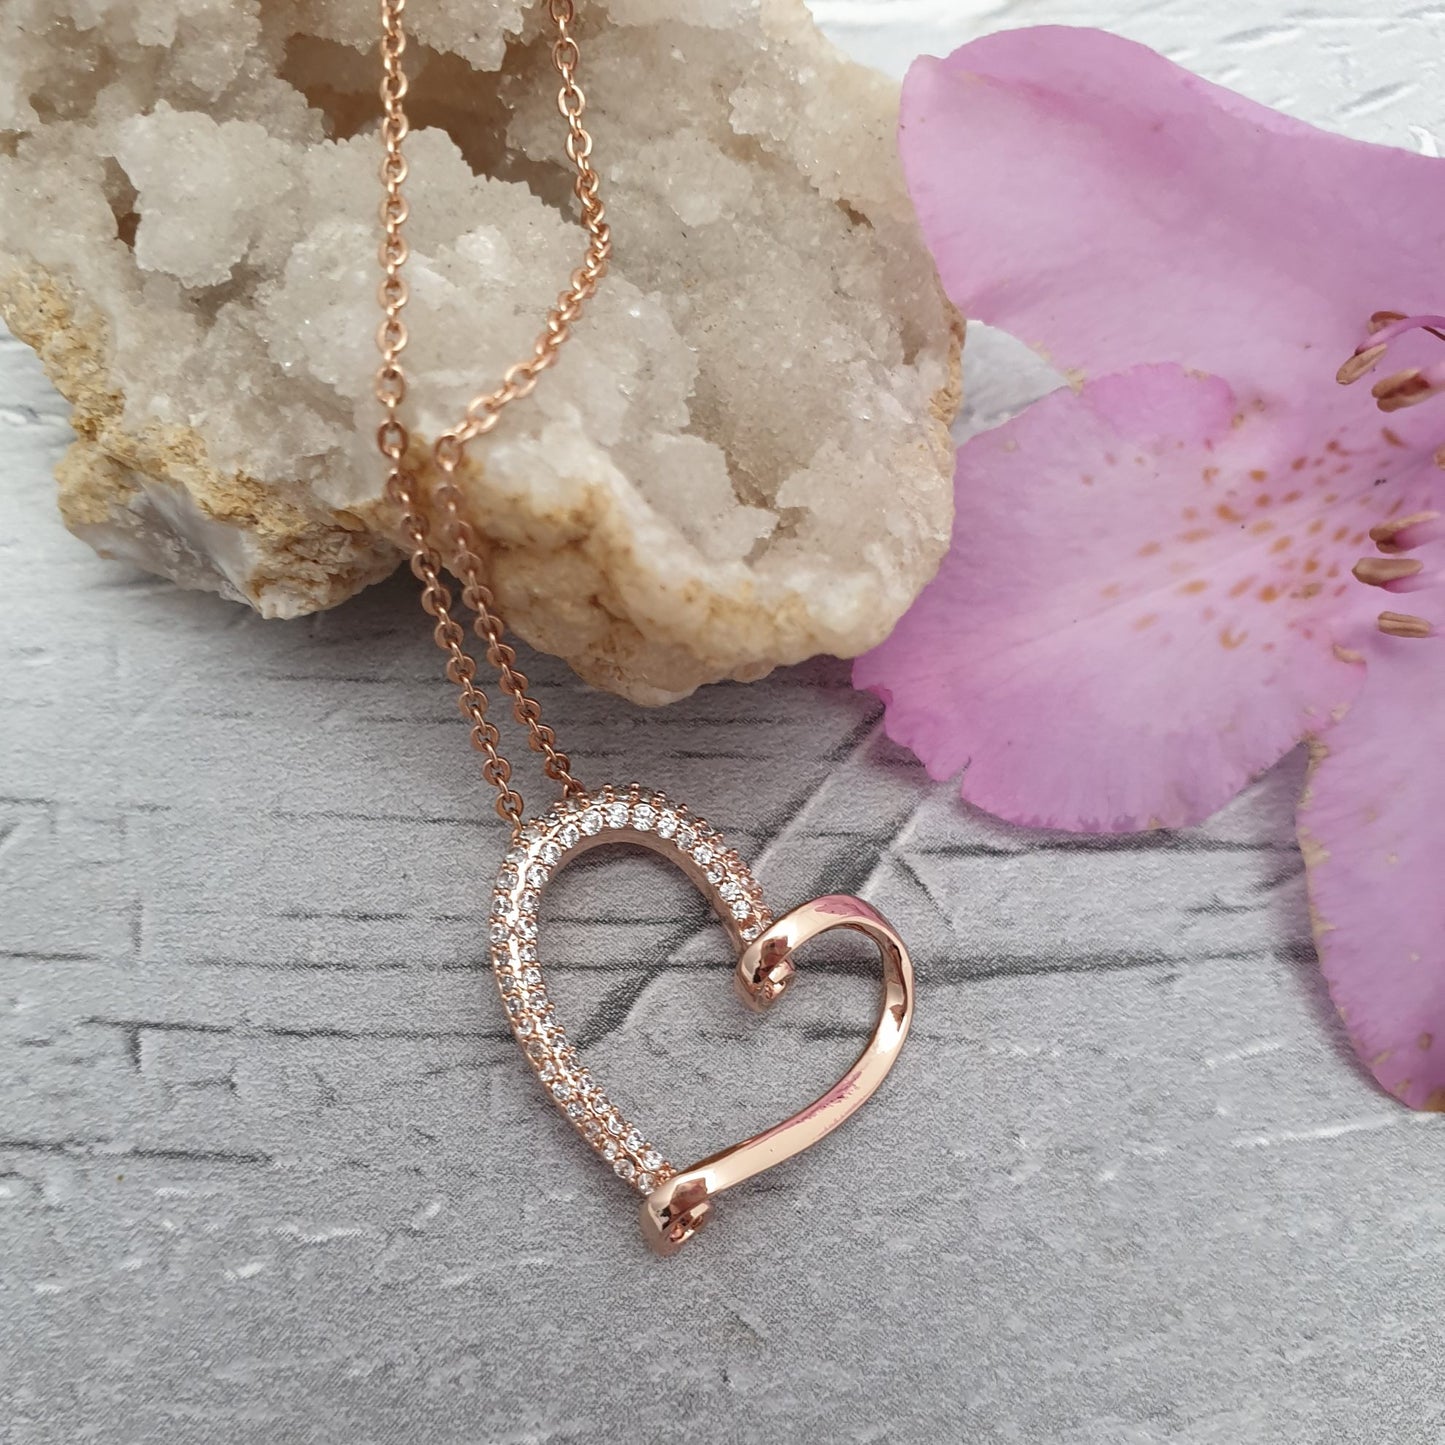 Rose Gold Plated necklace with a looped heart shaped pendant decorated with diamante crystals